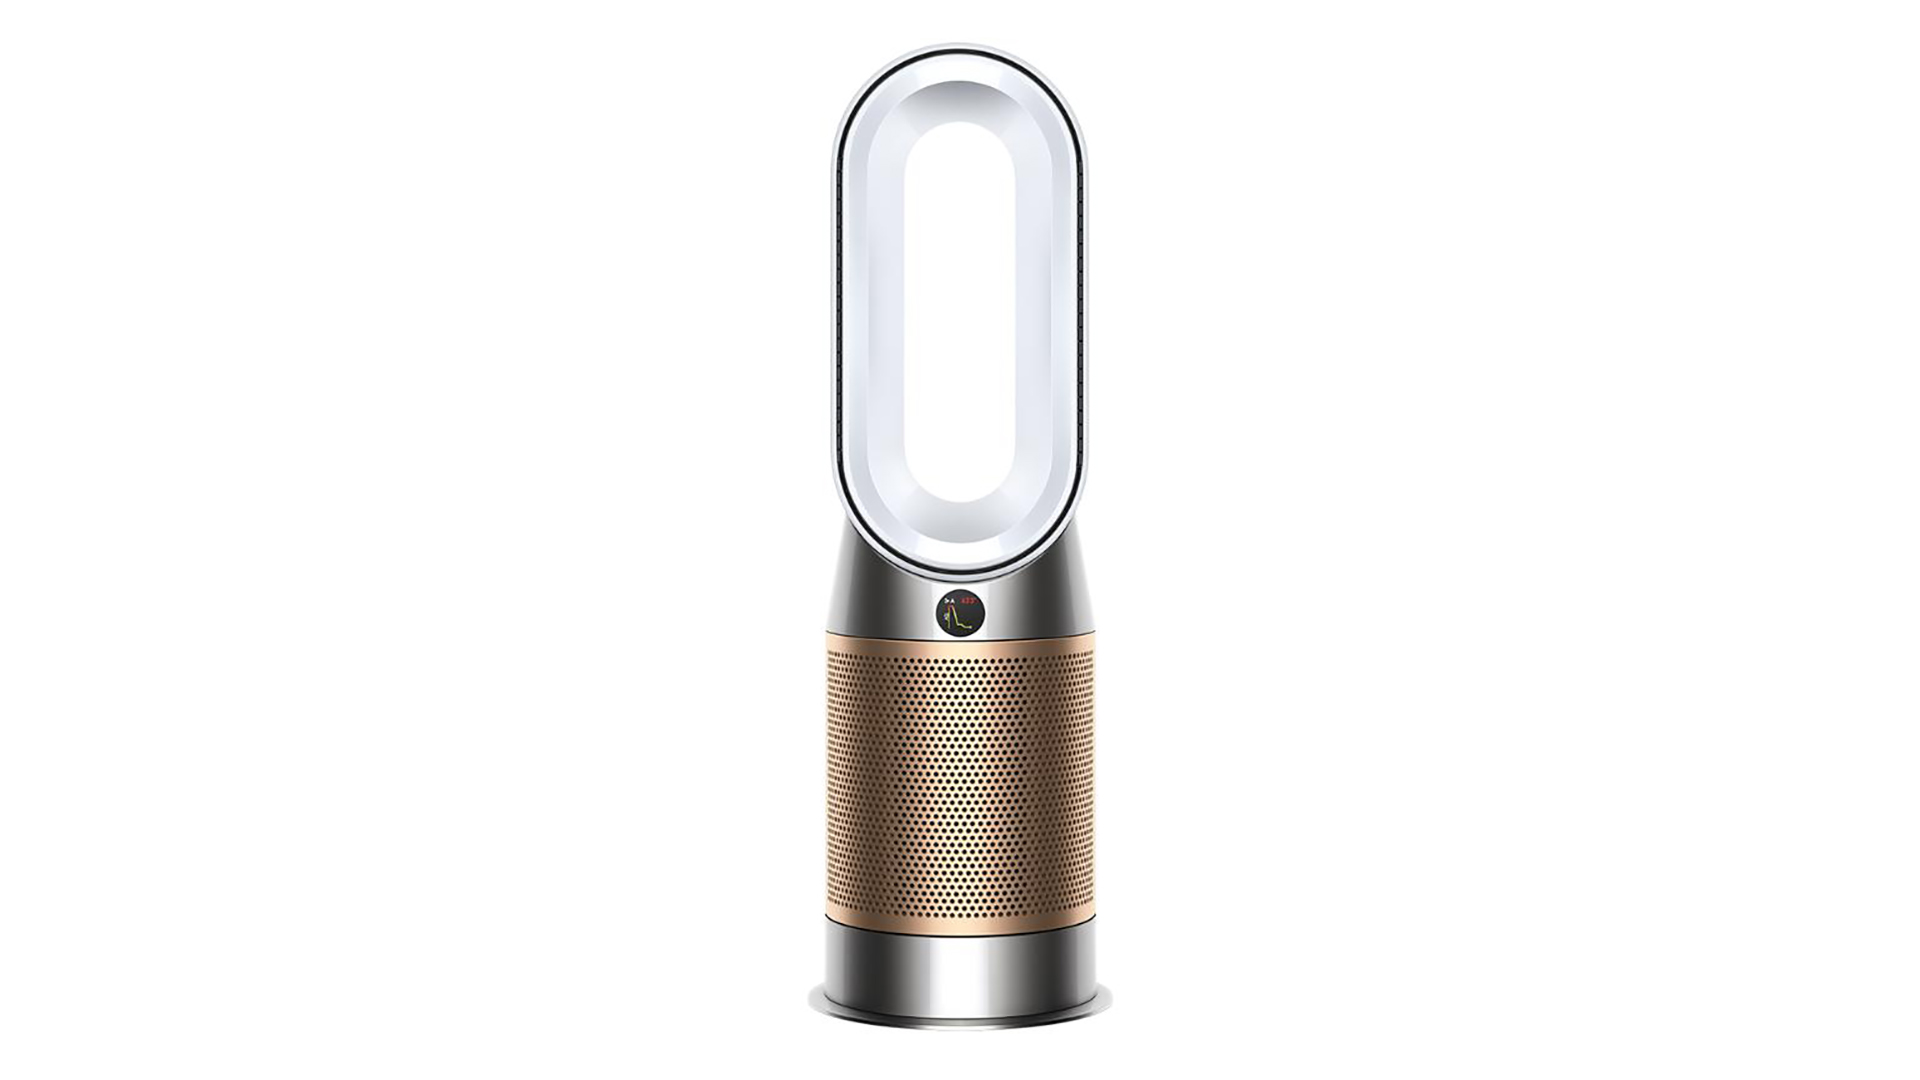 Best Dyson air purifier deals: Product photo of Dyson Pure Hot and Cool Formaldehyde